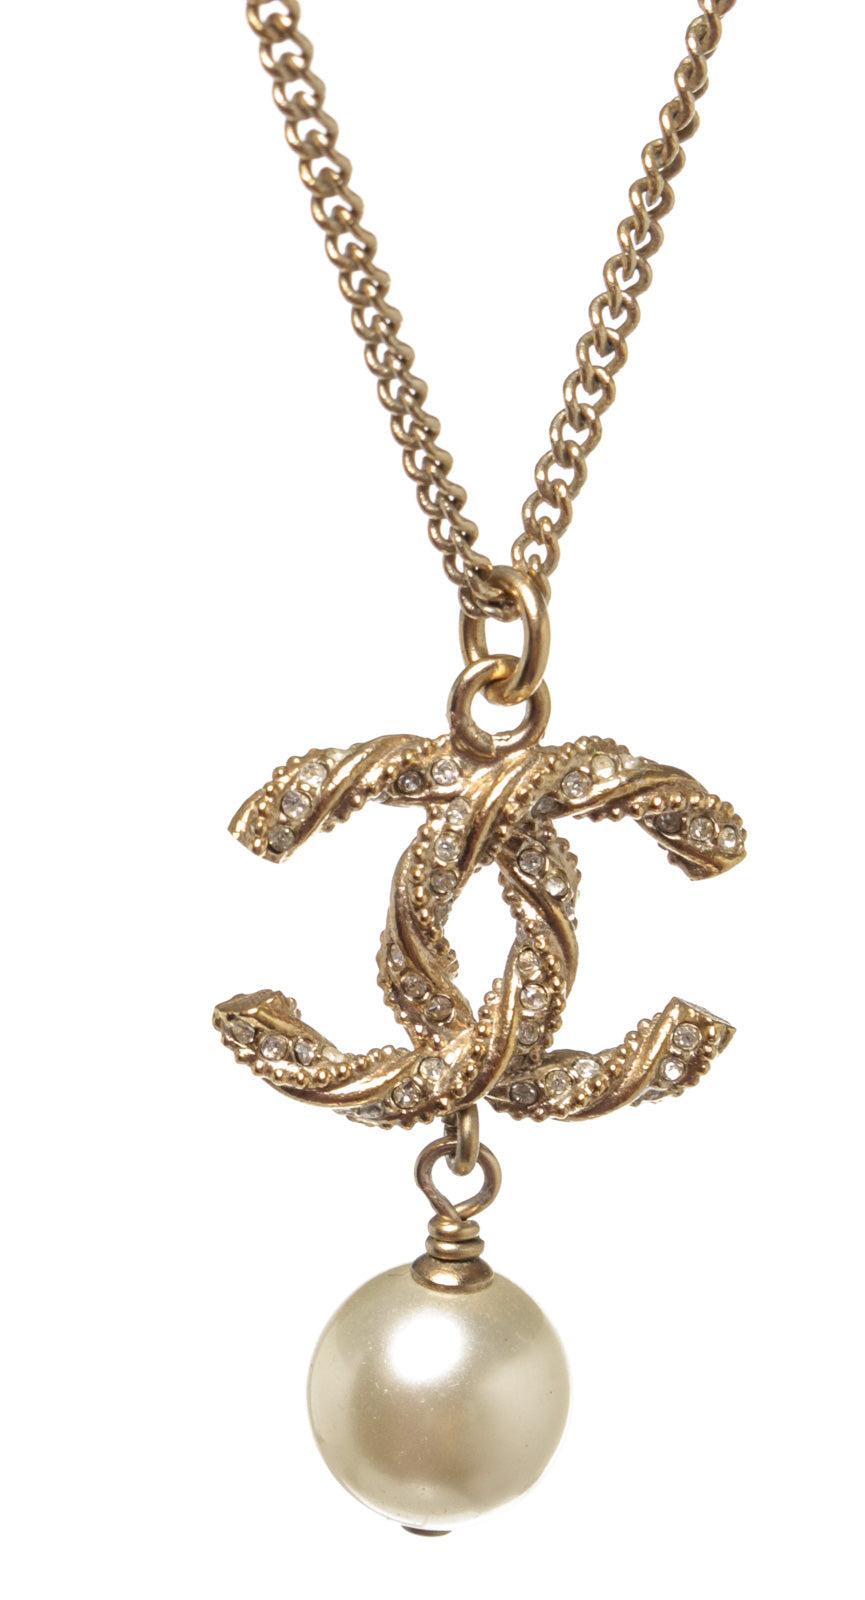 Gold-tone long chain Chanel CC necklace features dangle gold-tone CC logo and pearl pendant and lobster claw closure.
 

54116MSC